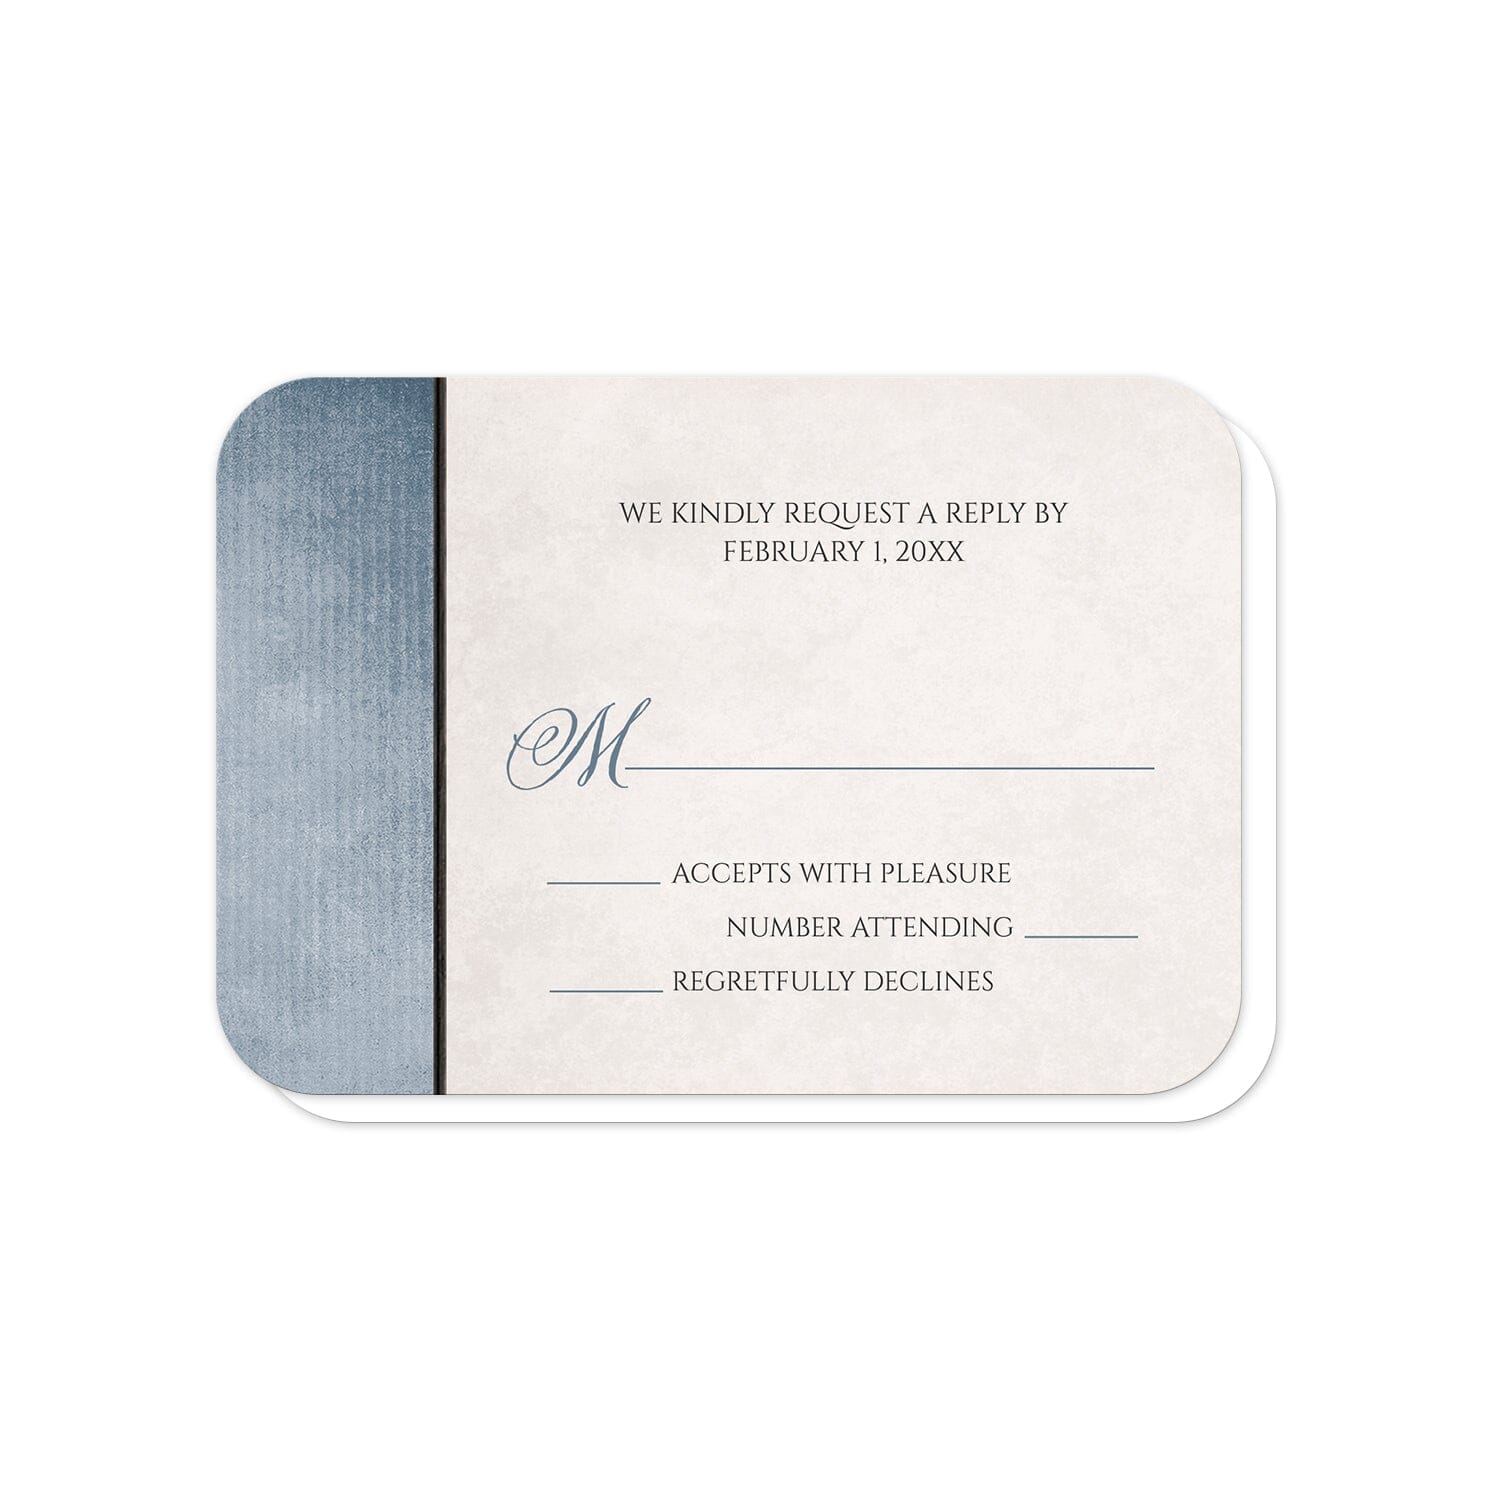 Lantern Daisy Rustic Blue RSVP Cards (with rounded corners) at Artistically Invited.